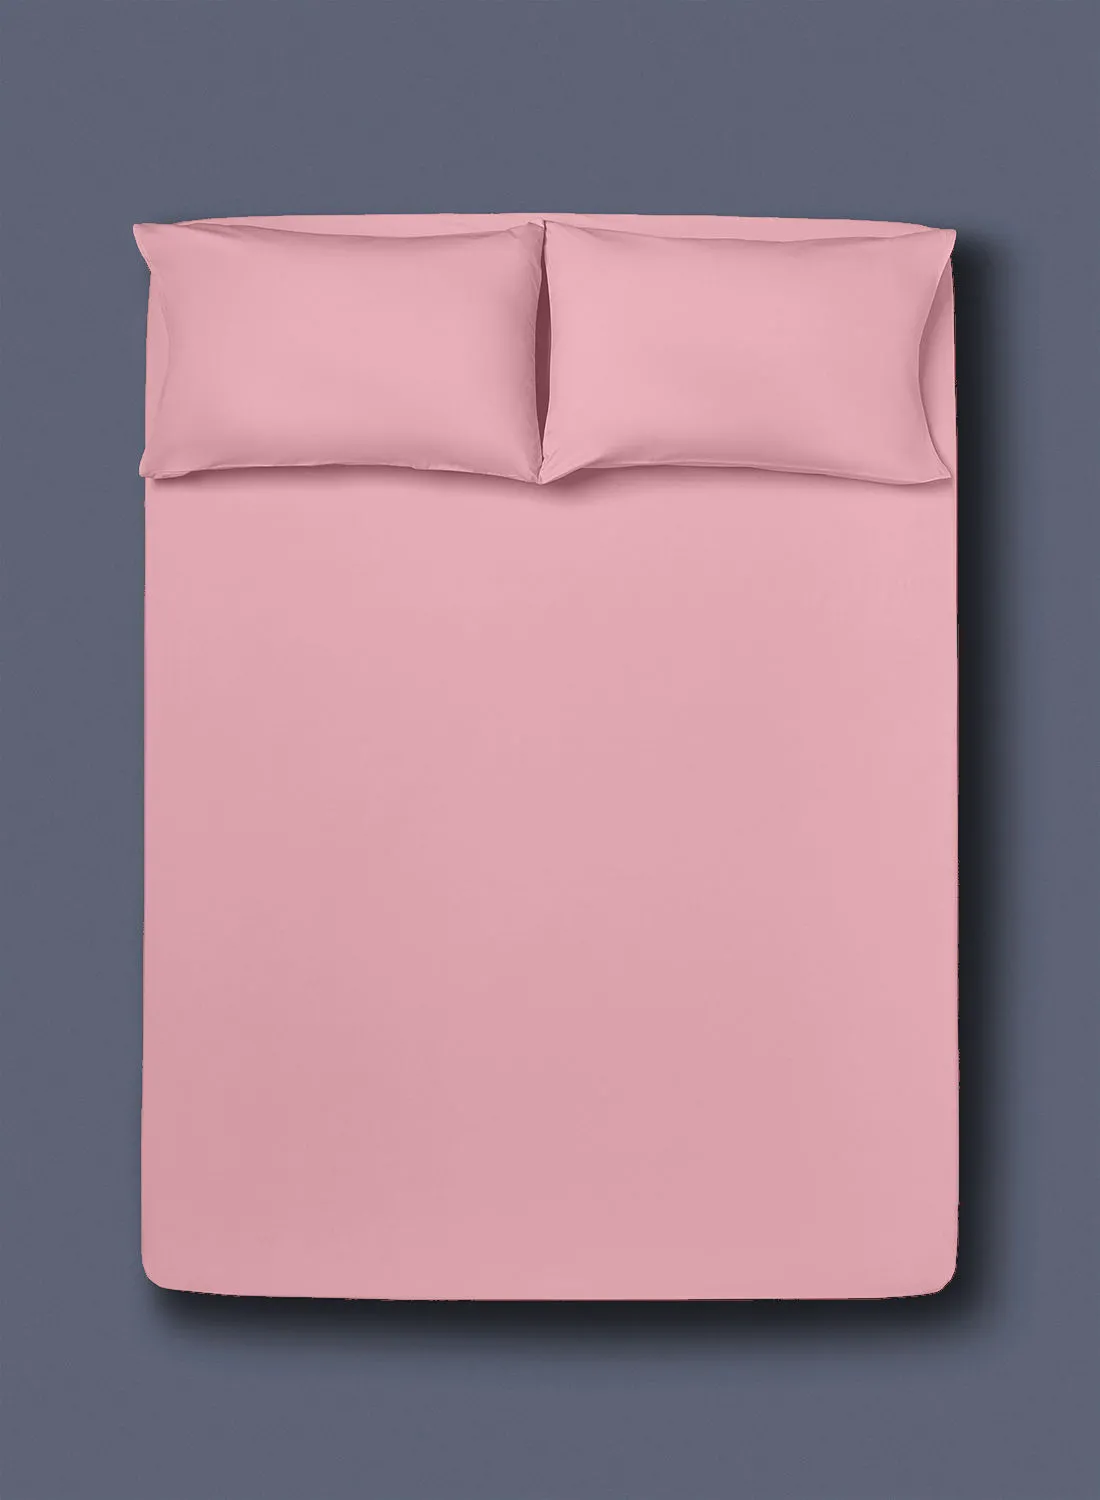 Amal Fitted Bedsheet Set Super King Size  100% Cotton Light Weight Everyday Use 144 TC High Quality 1 Bed Sheet And 2 Pillow Cases Pink Color